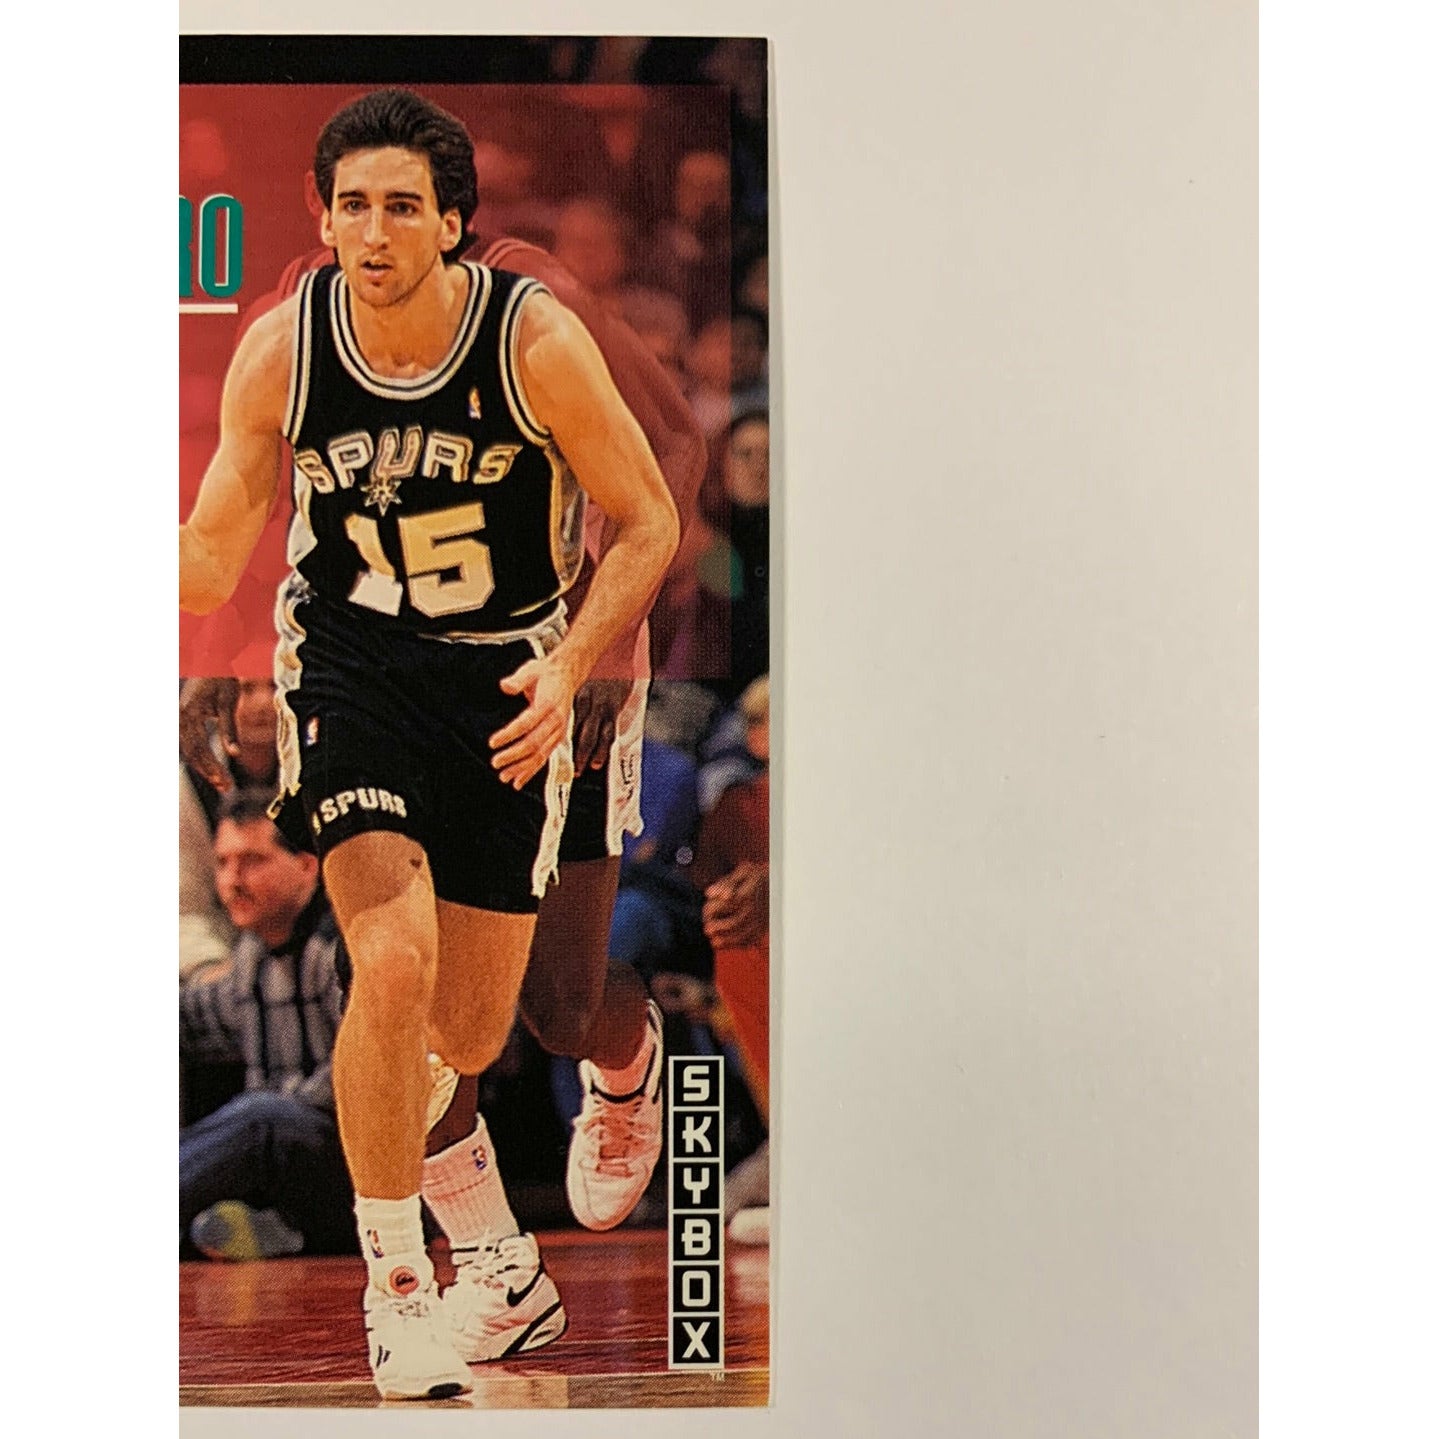  1992-93 Skybox Vinny Del Negro  Local Legends Cards & Collectibles